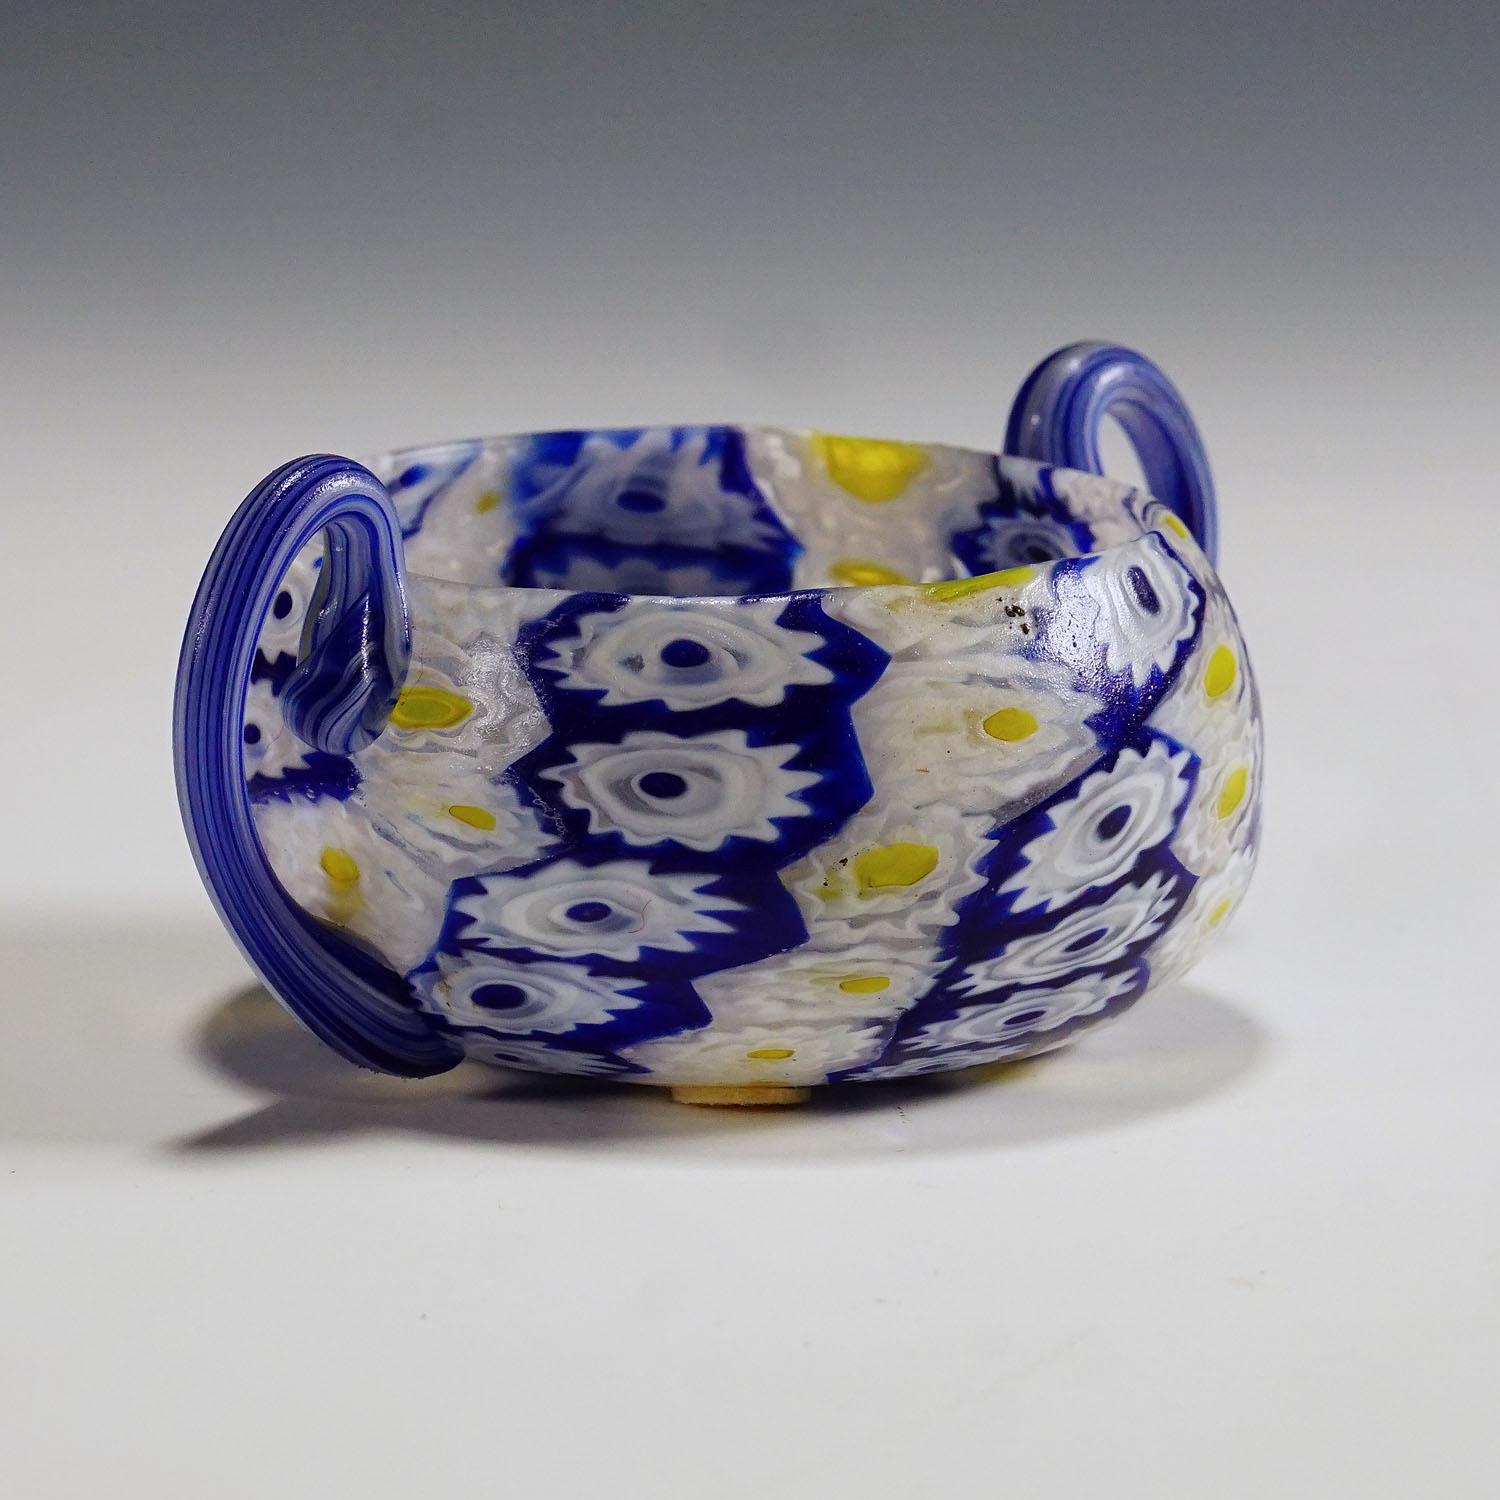 Hand-Crafted Antique Millefiori Bowl in Blue, Yellow and White, Fratelli Toso Murano 1910 For Sale